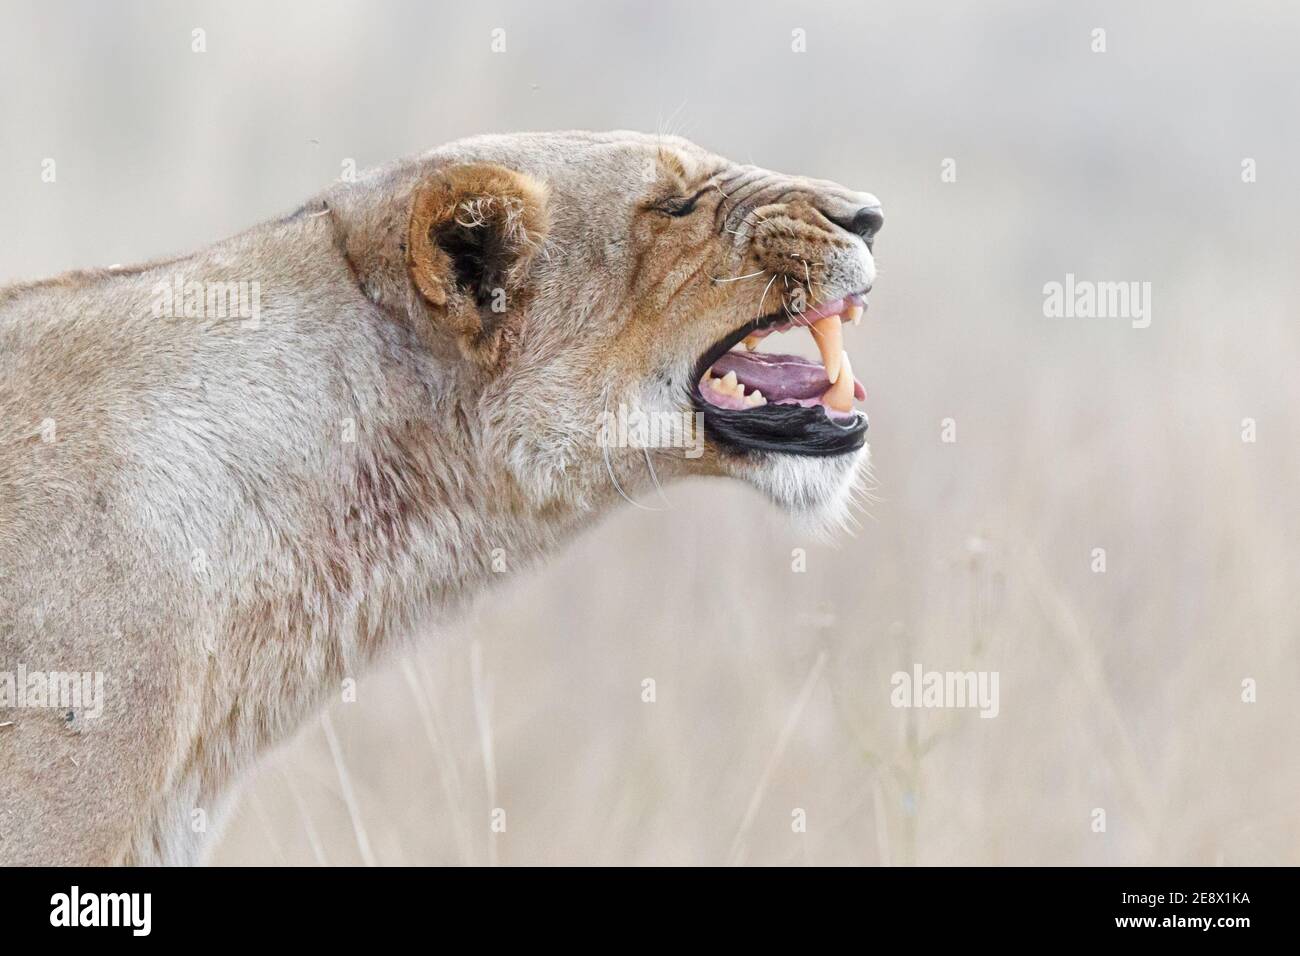 Lioness portrait, Panthera leo, roaring and displaying her teeth. Side view and blurred background. Okavango Delta, Botswana, Africa Stock Photo